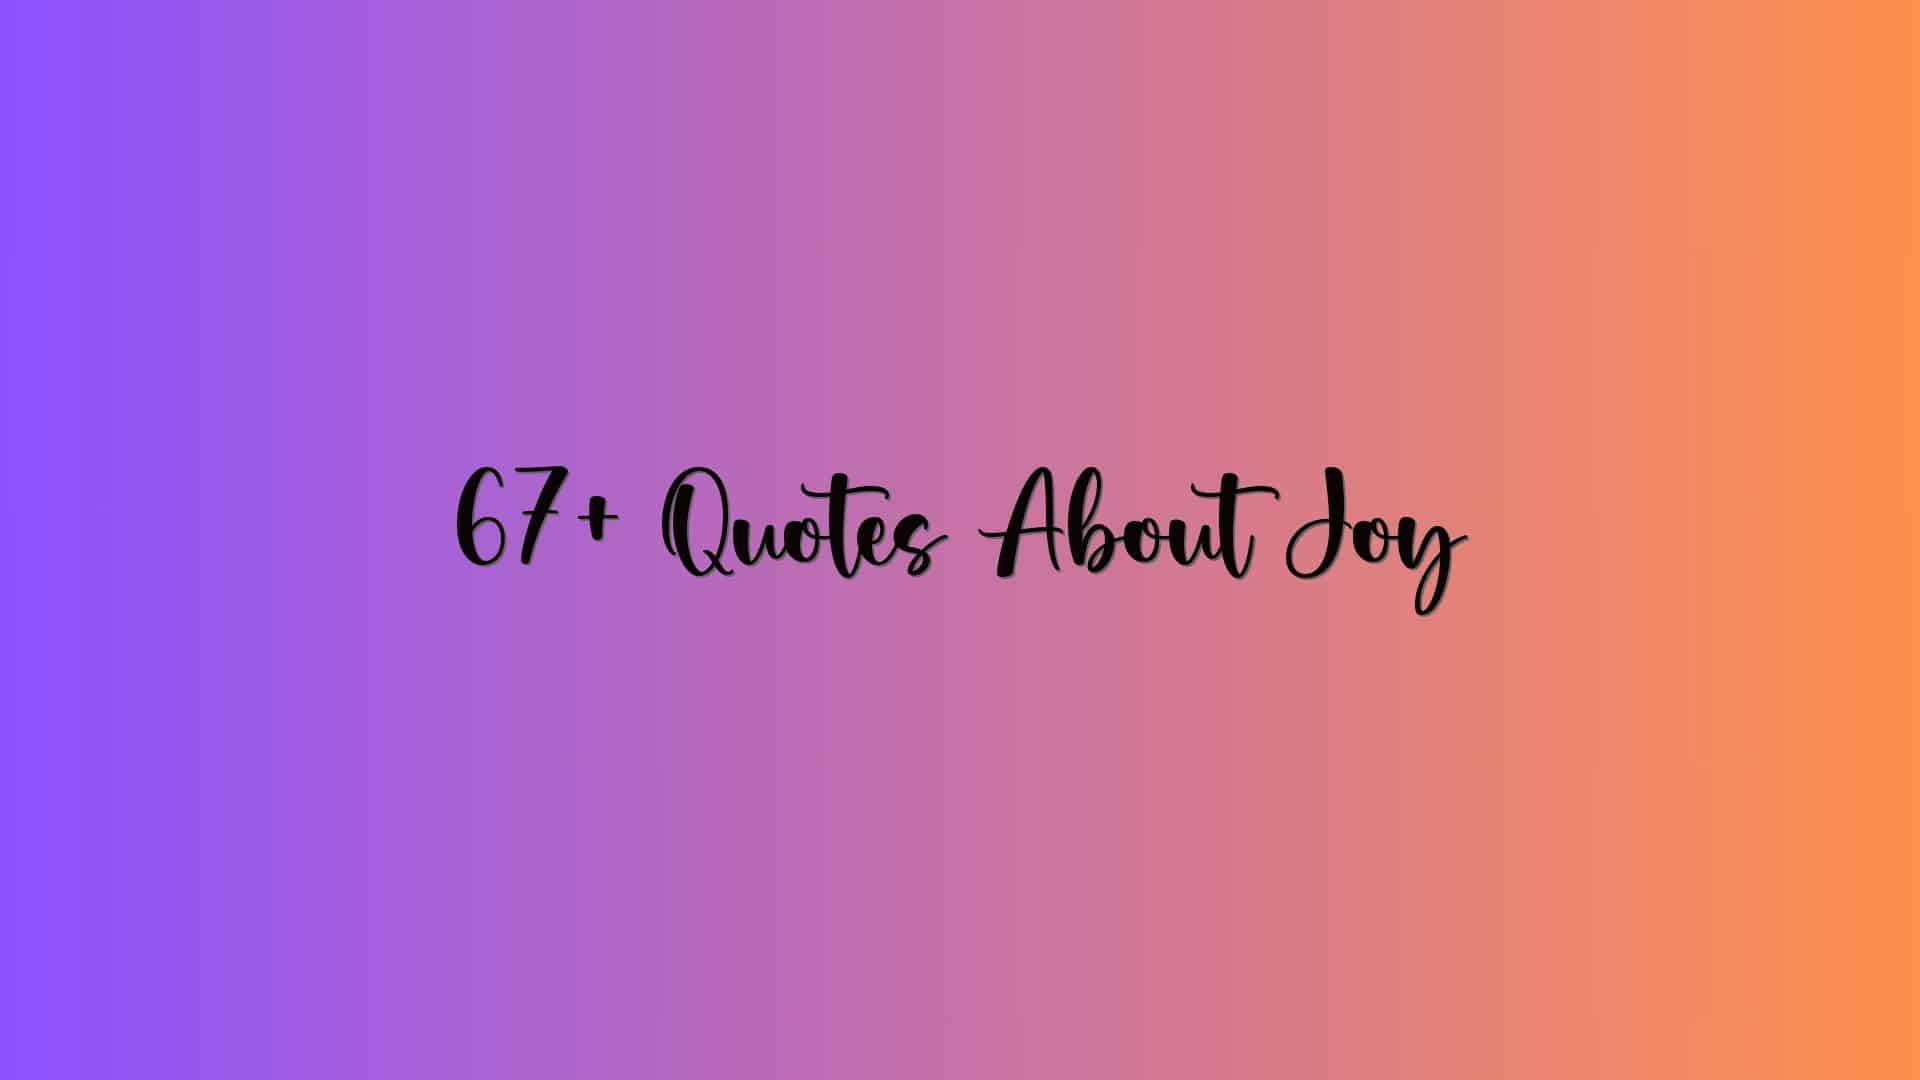 67+ Quotes About Joy